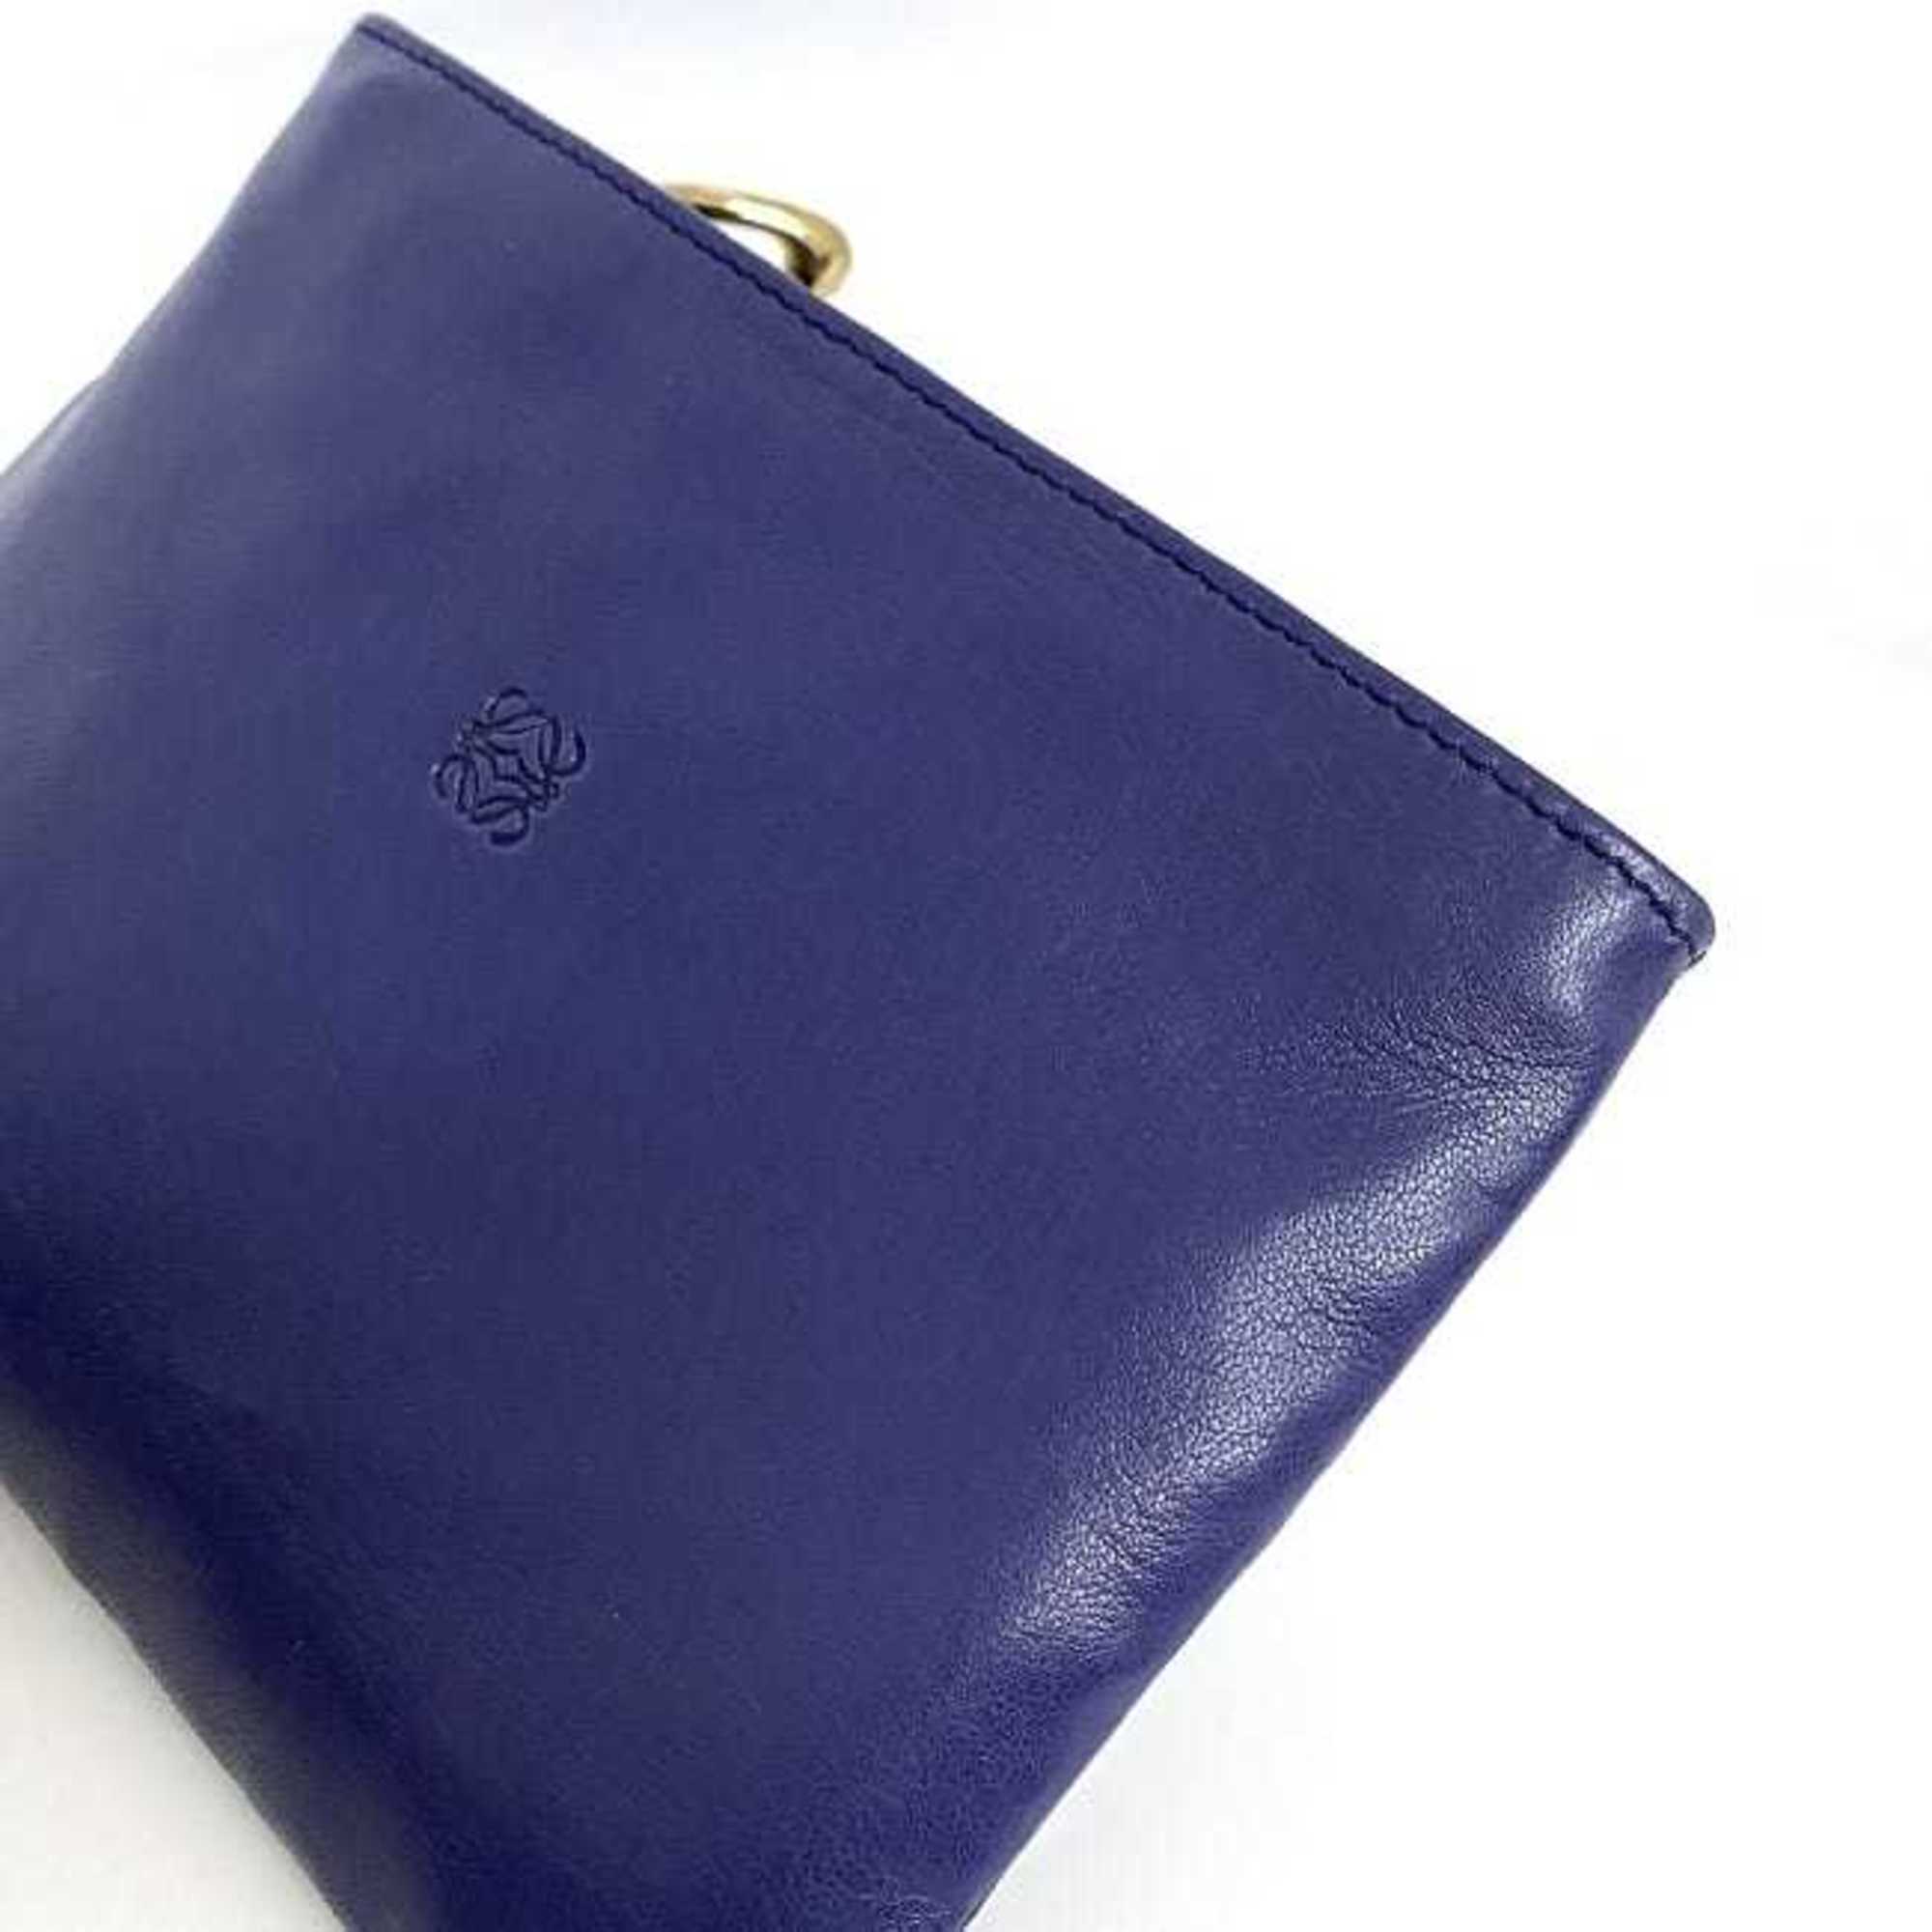 LOEWE Pouch Navy Anagram Leather Women's Compact